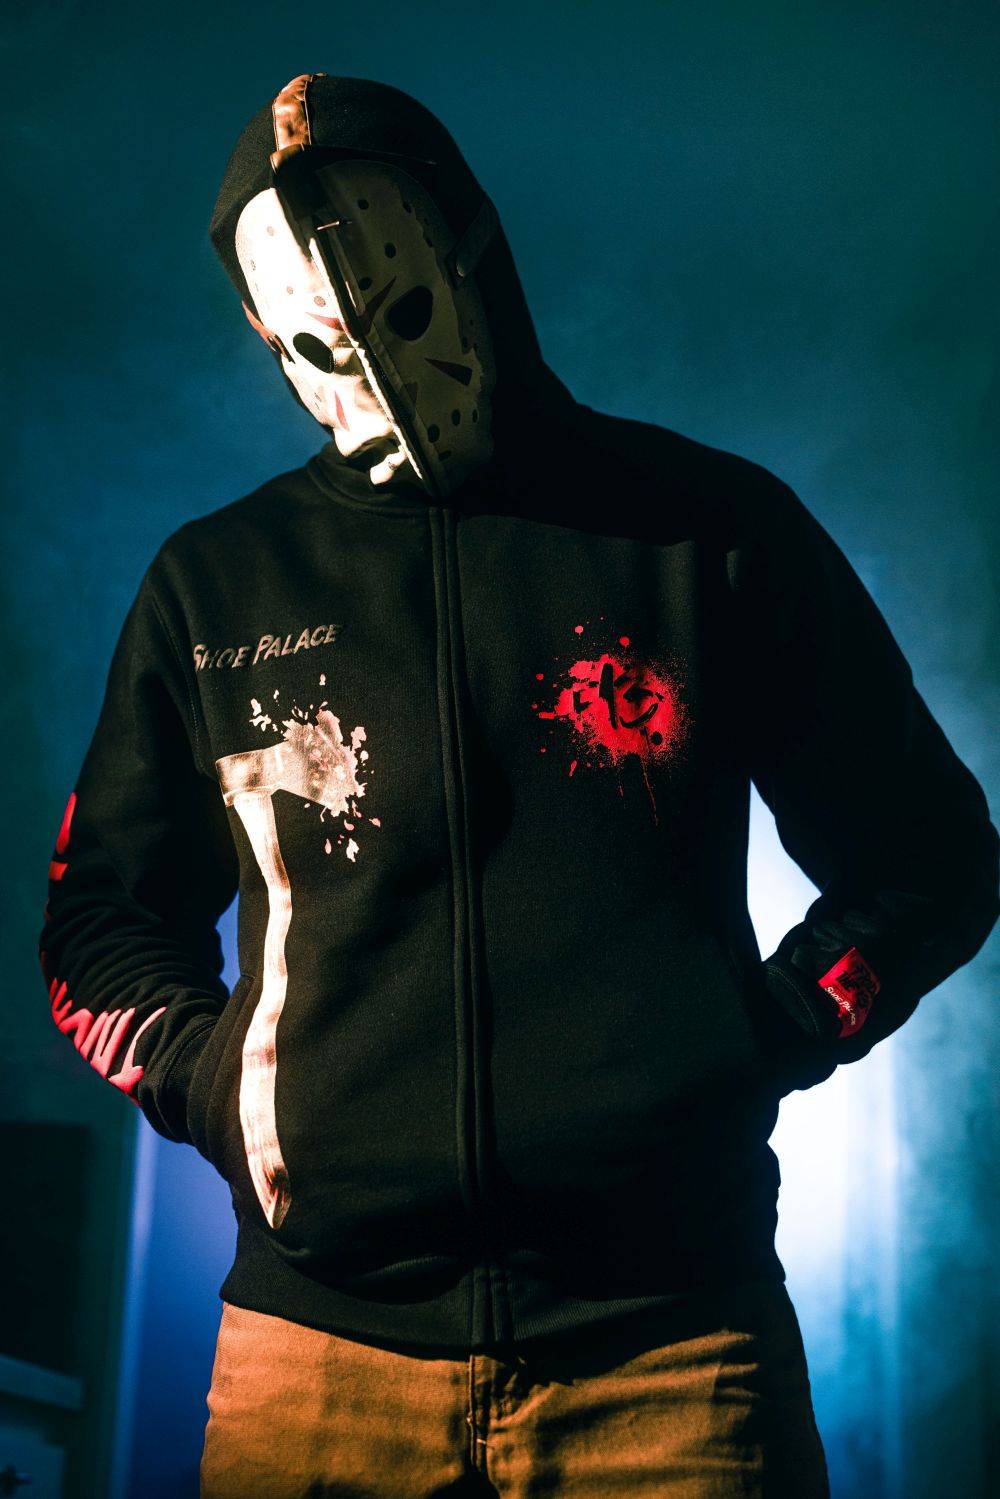 sp x friday the 13th model wearing black jacket and Halloween mask